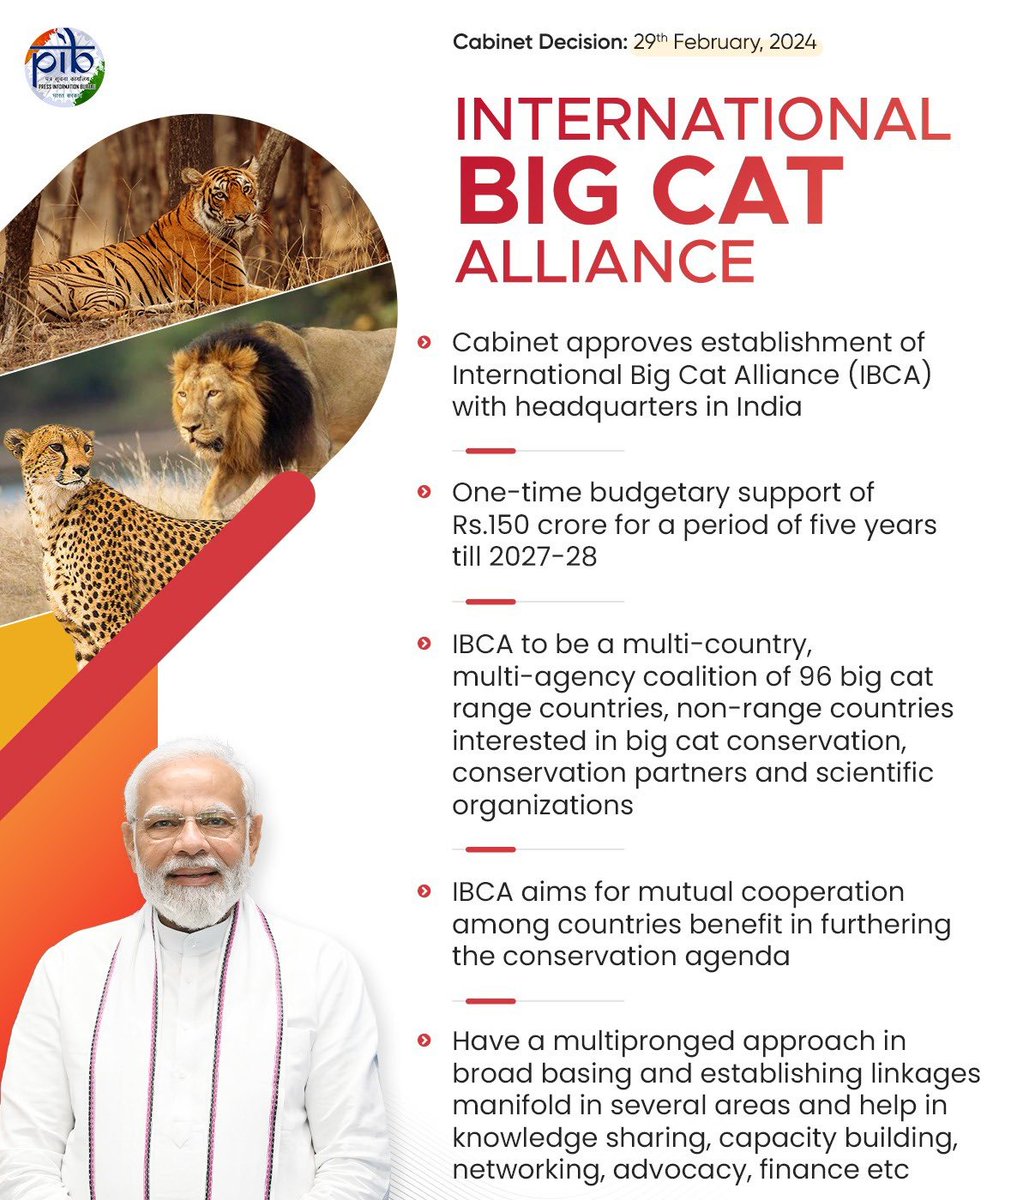 The Union Cabinet led by PM Shri @narendramodi ji today approved the establishment of the International Big Cat Alliance with its HQ in India. The move reflects PM Modi’s commitment towards conservation of wildlife, particularly tigers and other endangered big cats. This